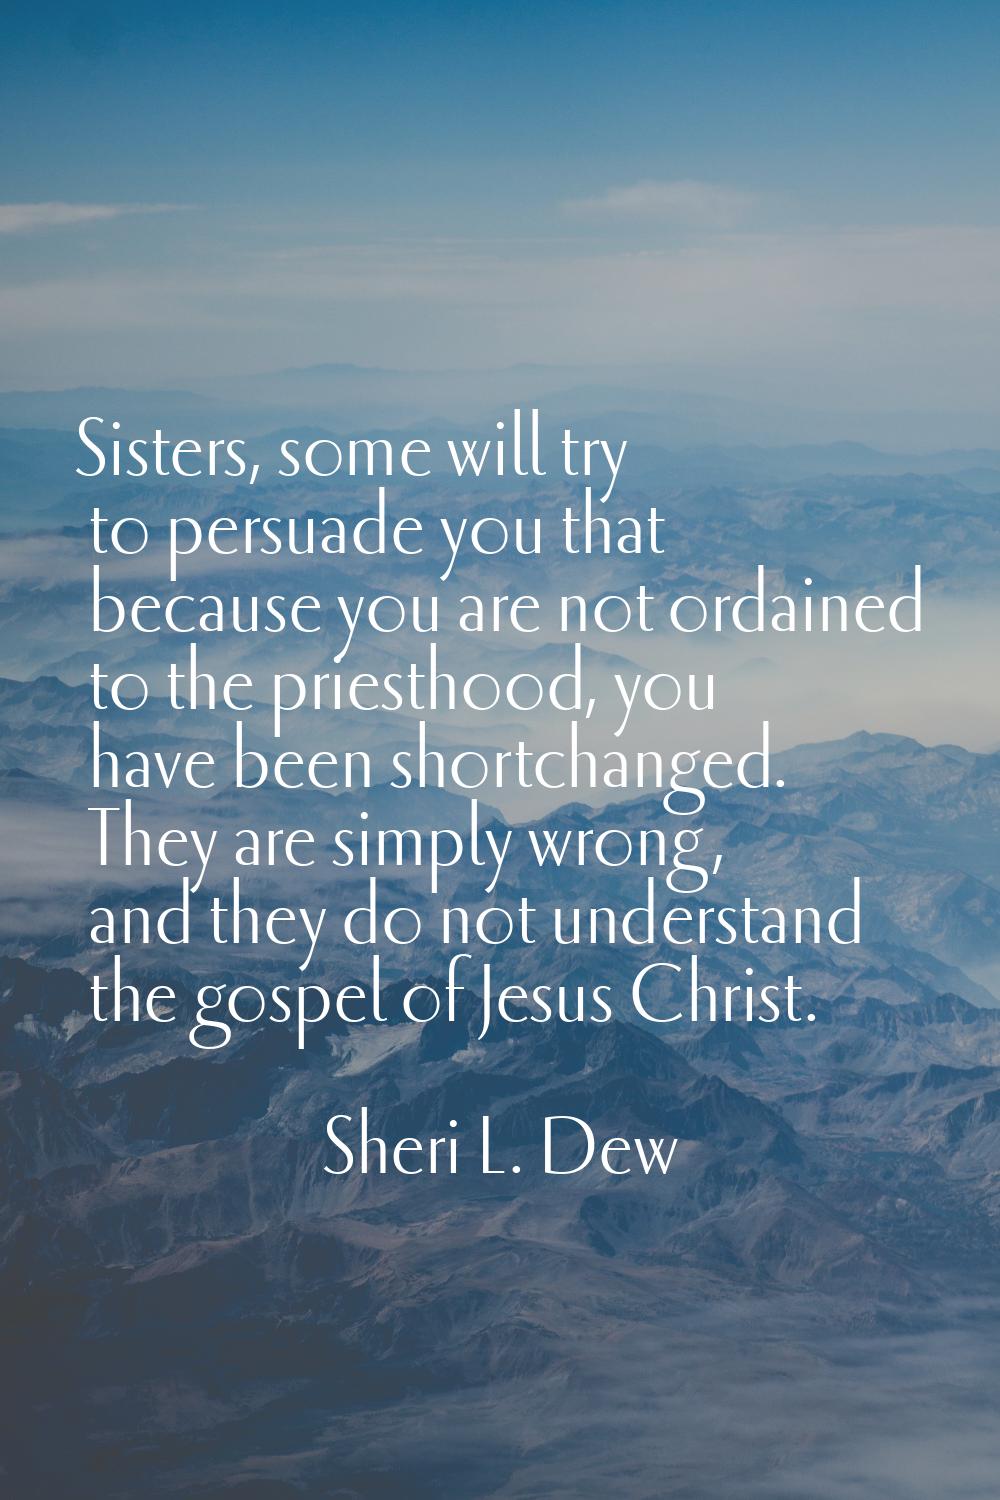 Sisters, some will try to persuade you that because you are not ordained to the priesthood, you hav